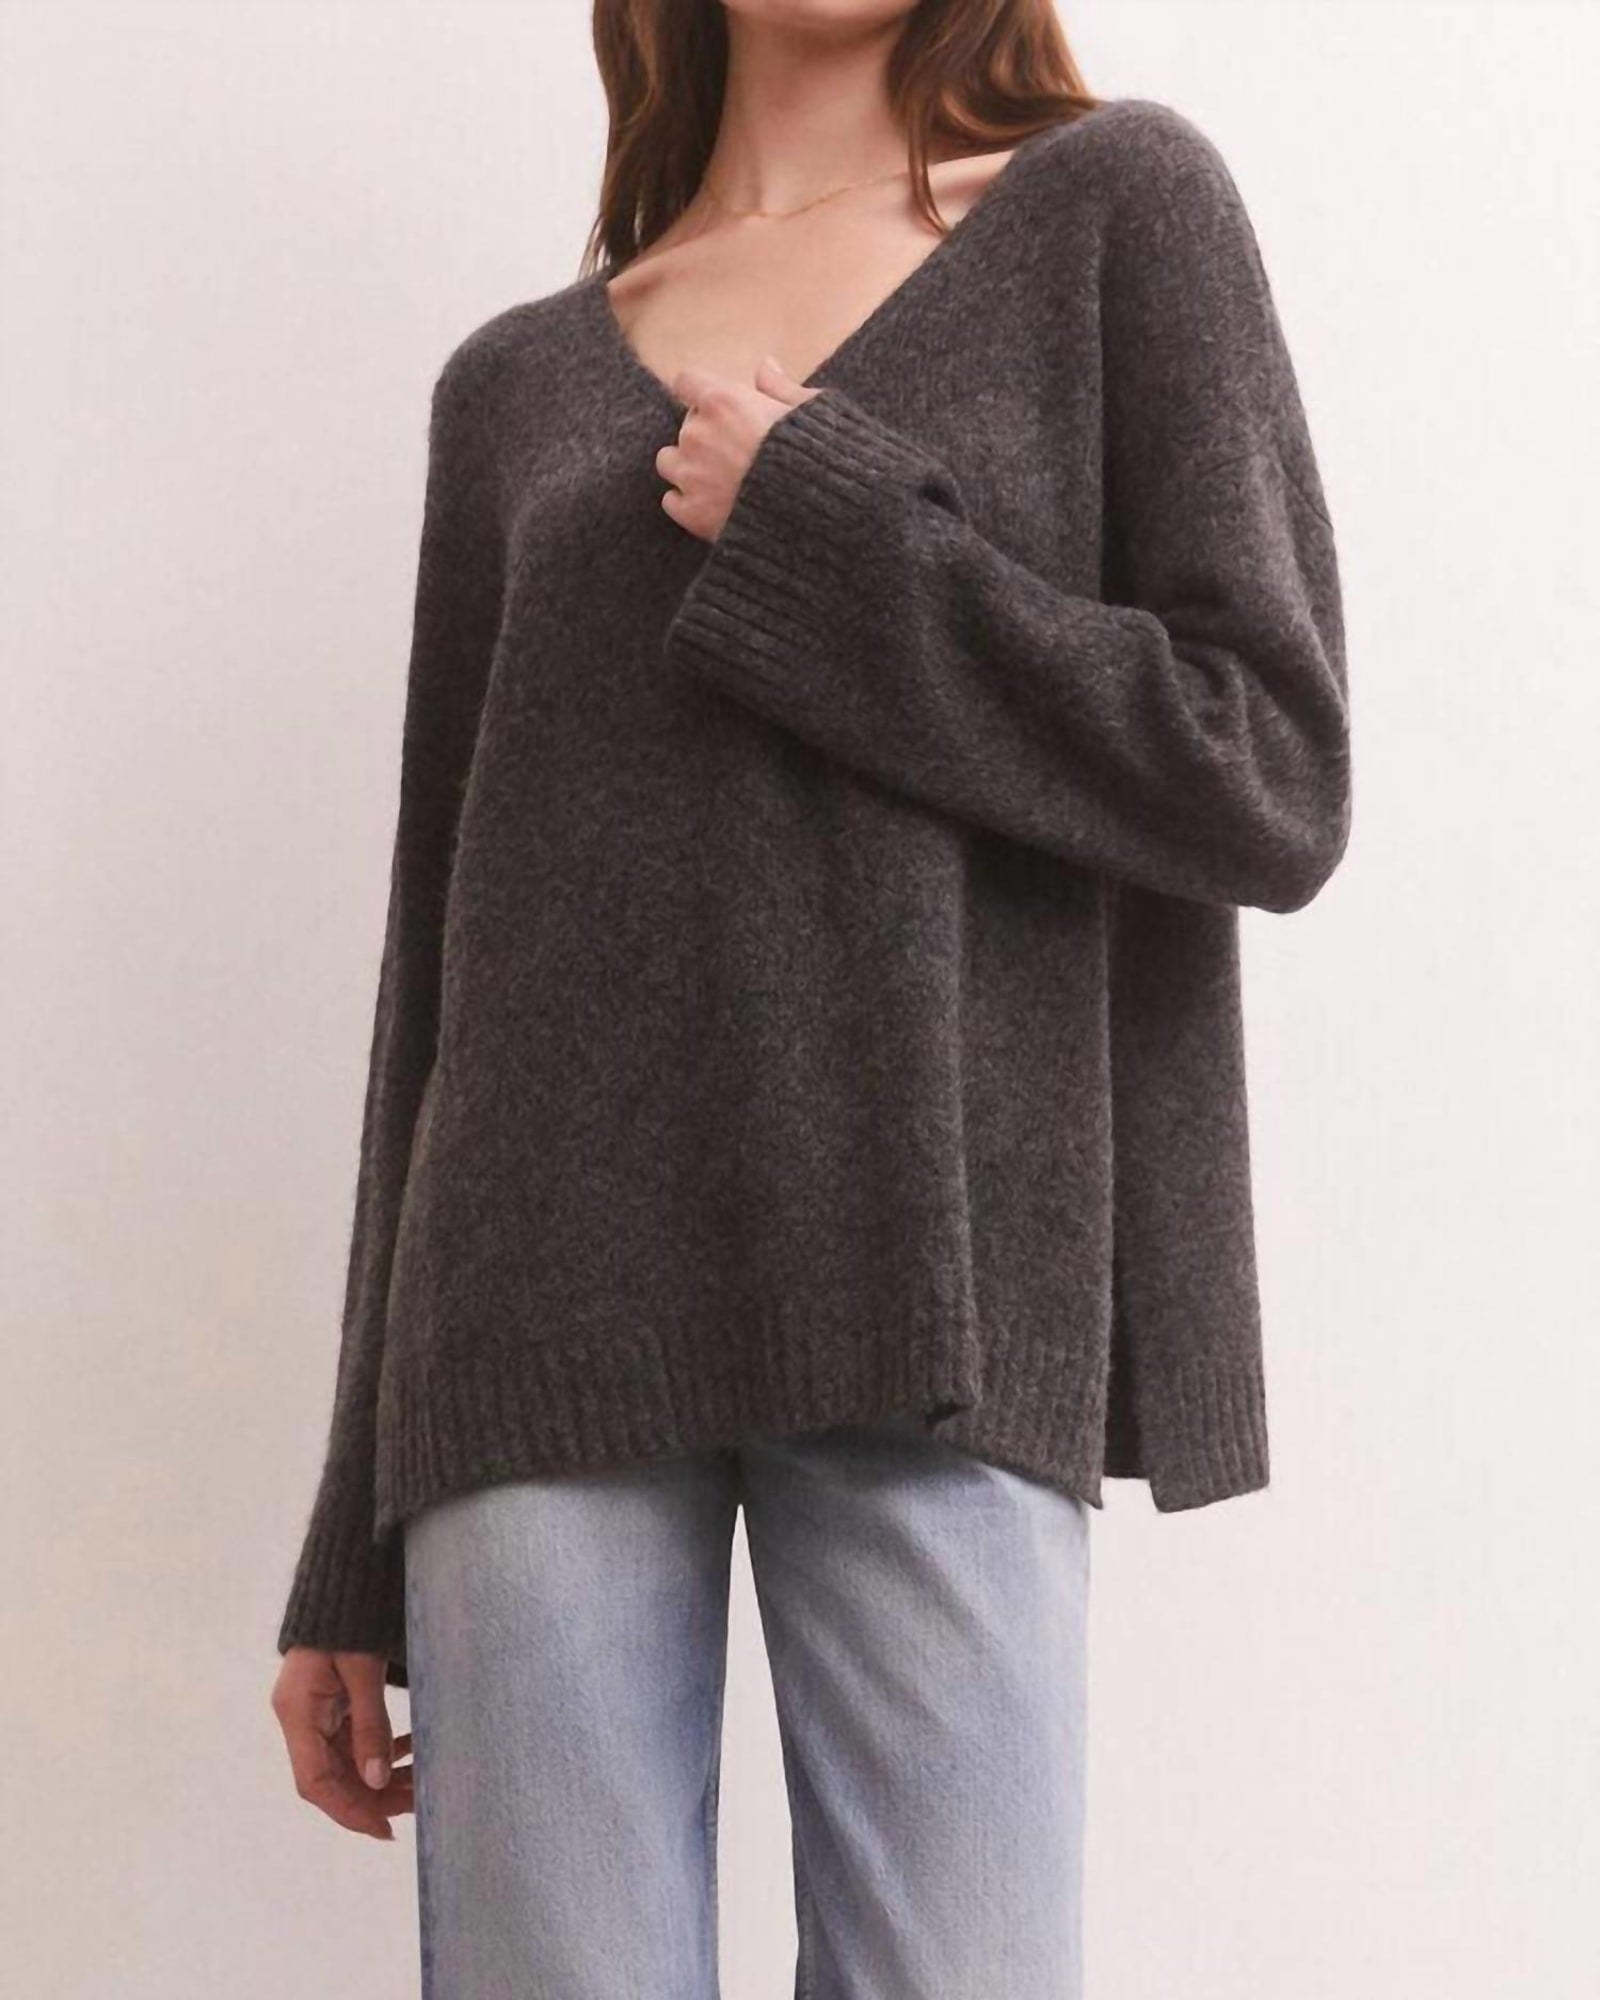 Modern Sweater in Charcoal Heather | Charcoal Heather